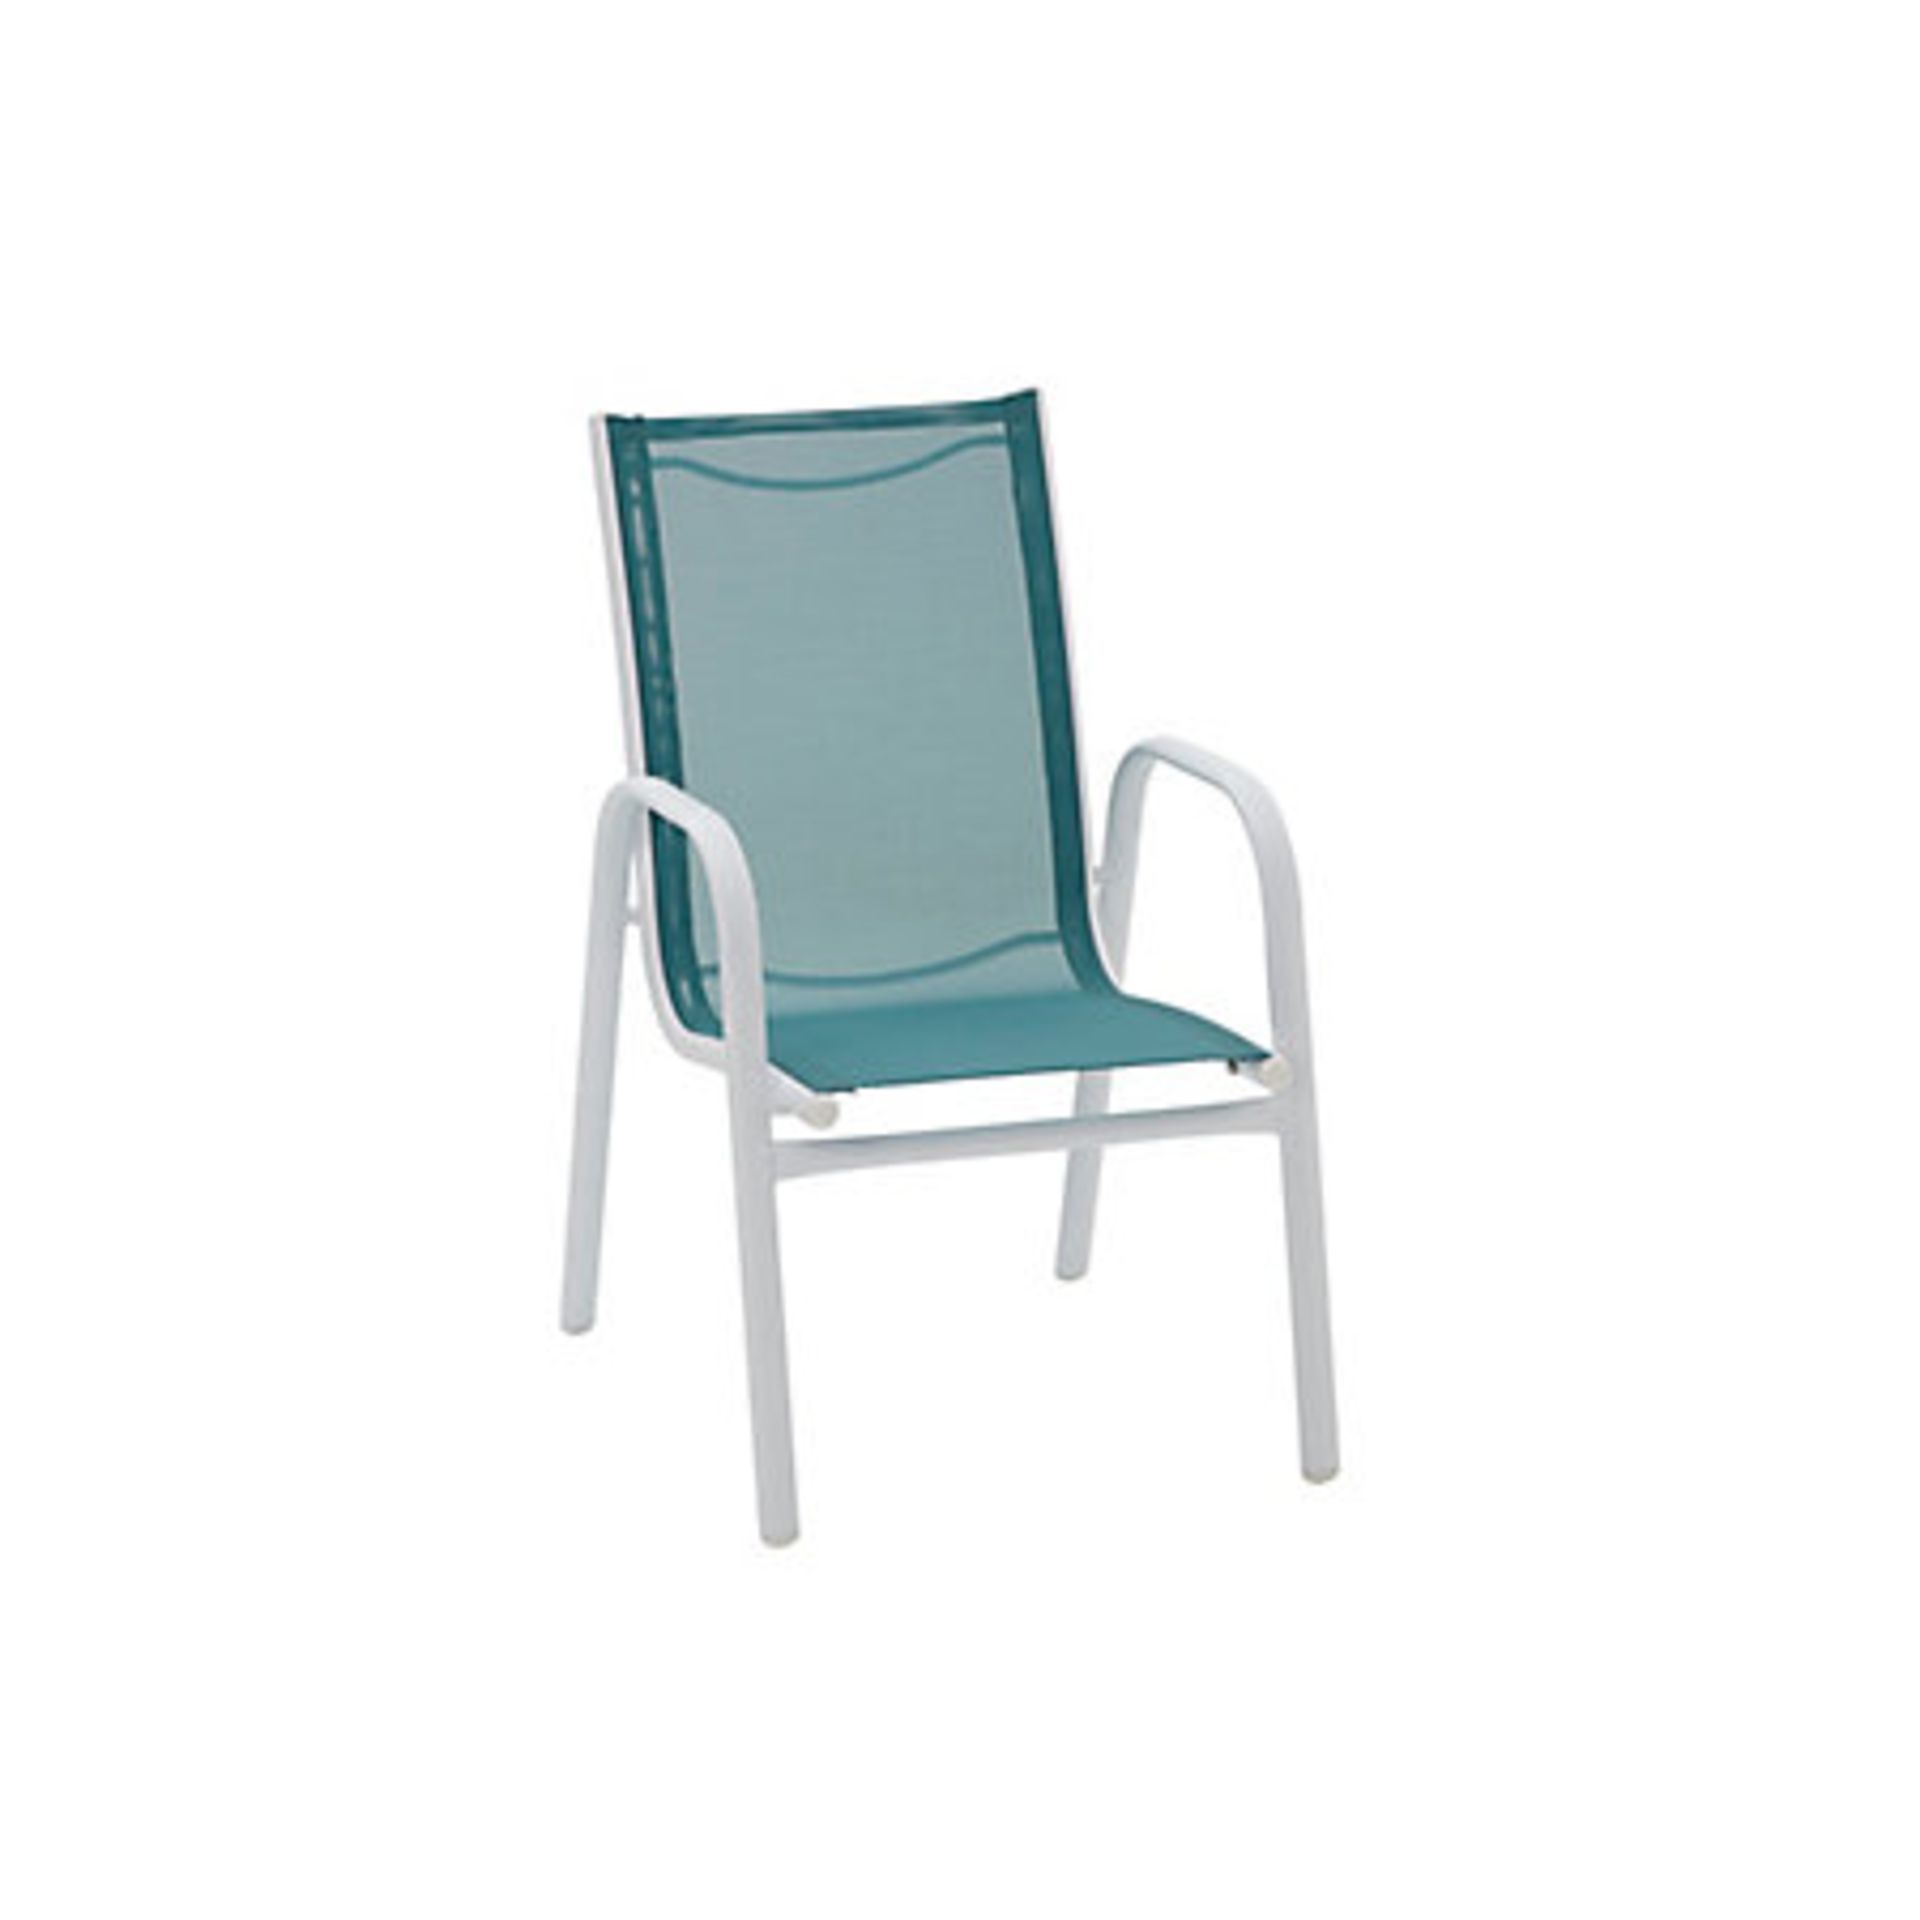 V *TRADE QTY* Brand New Childrens Steel Garden Chair In Blue And Pink With Plastic Seat X 4 Bid